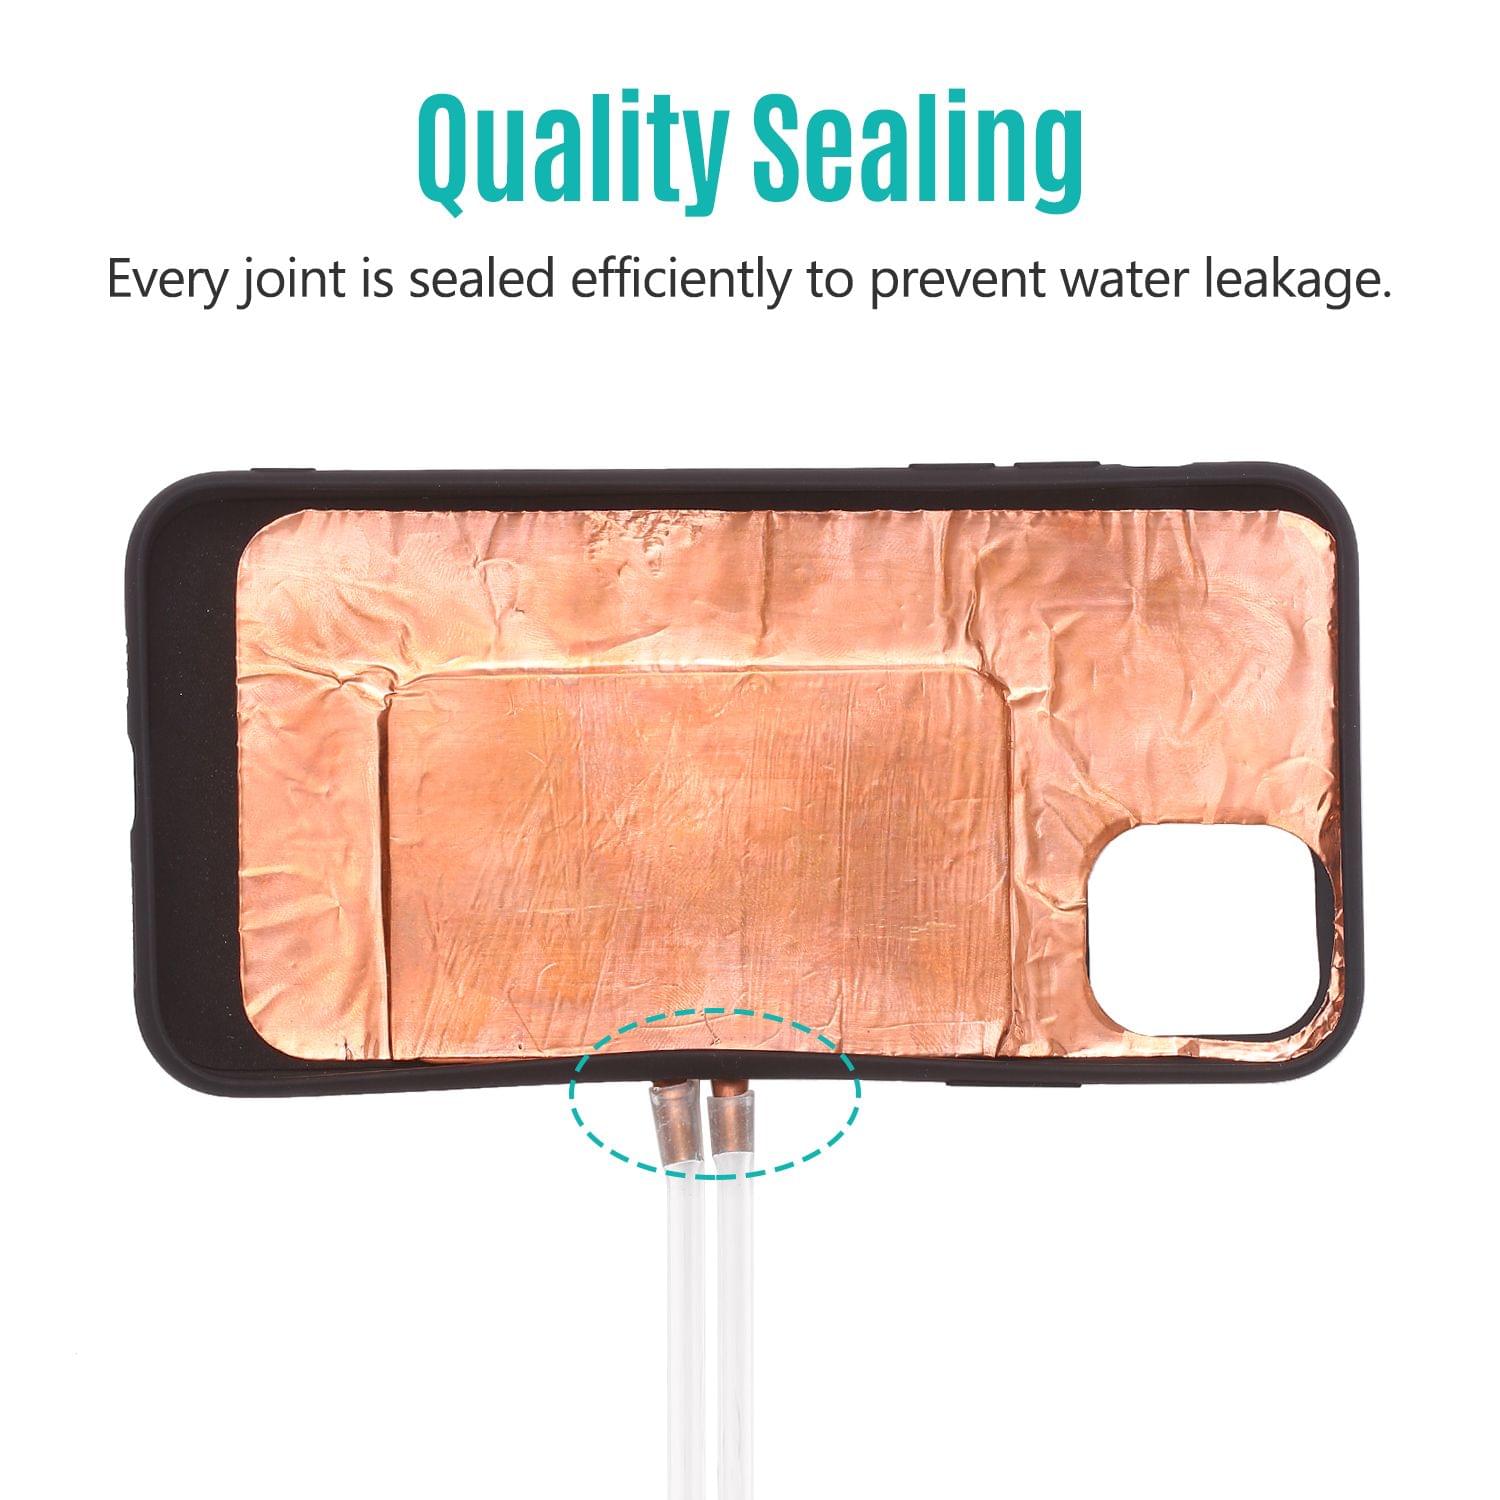 Phone Cooler Mobile Phone Radiator Water-cooled Cooling - Compatible with iPhone 11 6.5inch